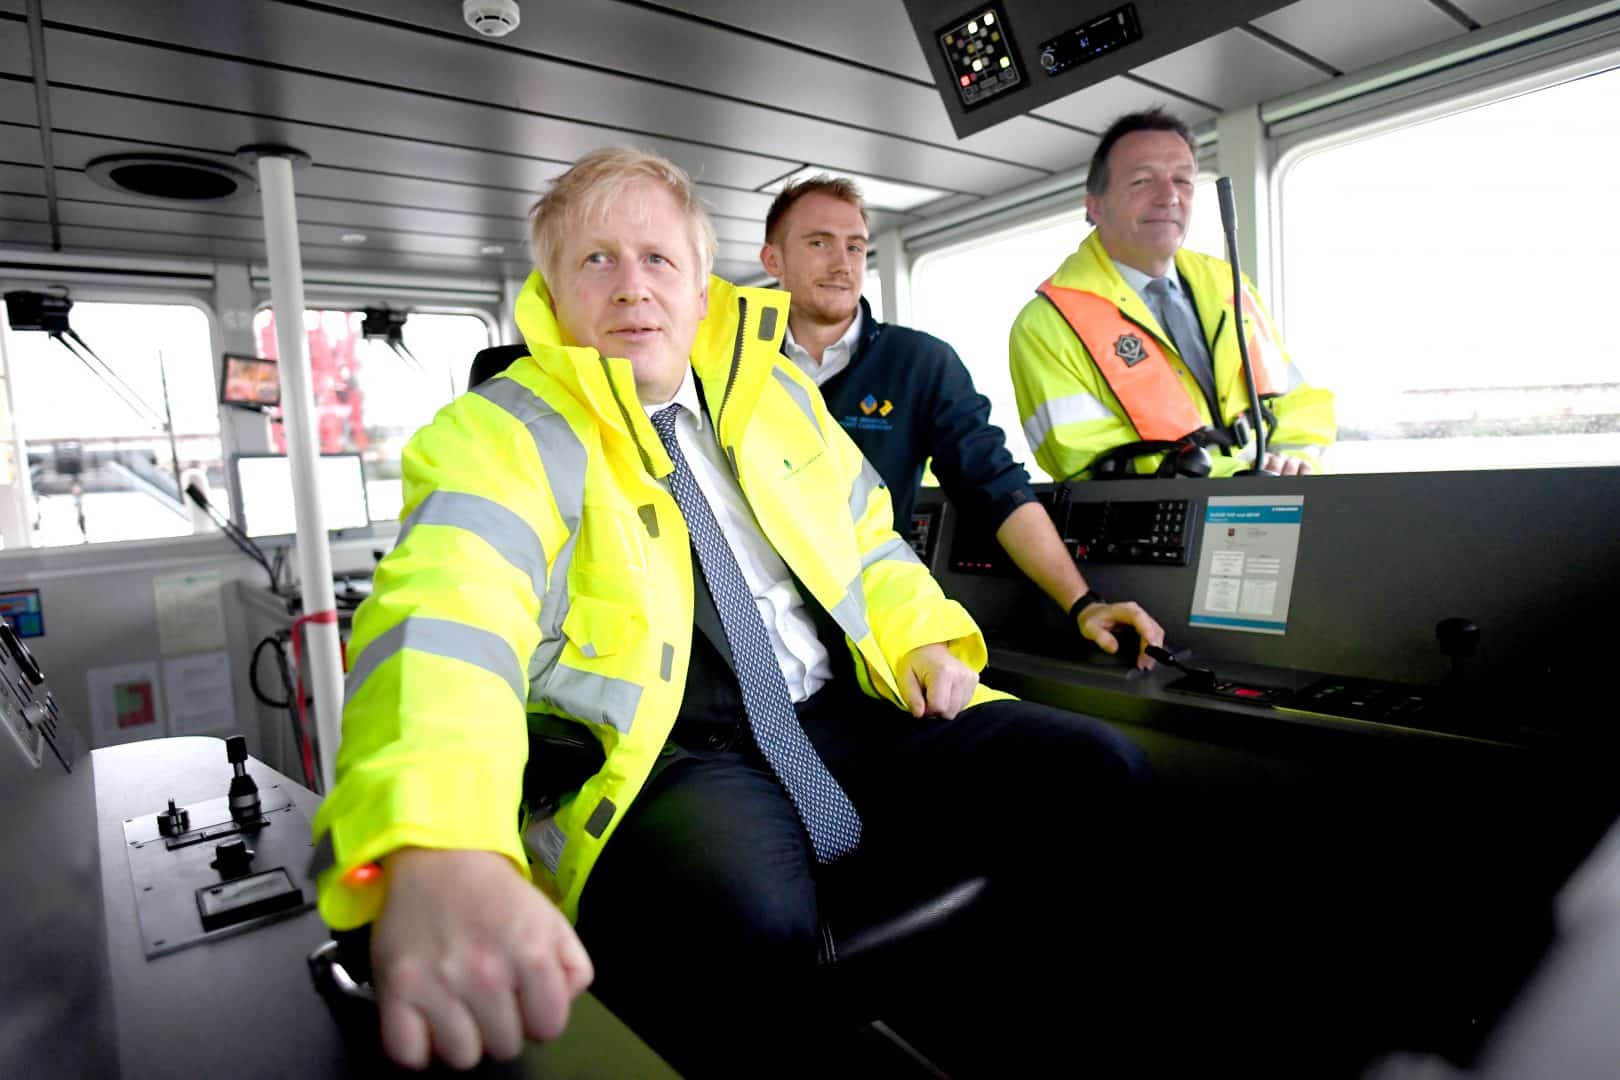 Boris Johnson’s fastest U-turn yet- rowing back back from Tory pledge to cut immigration within hours